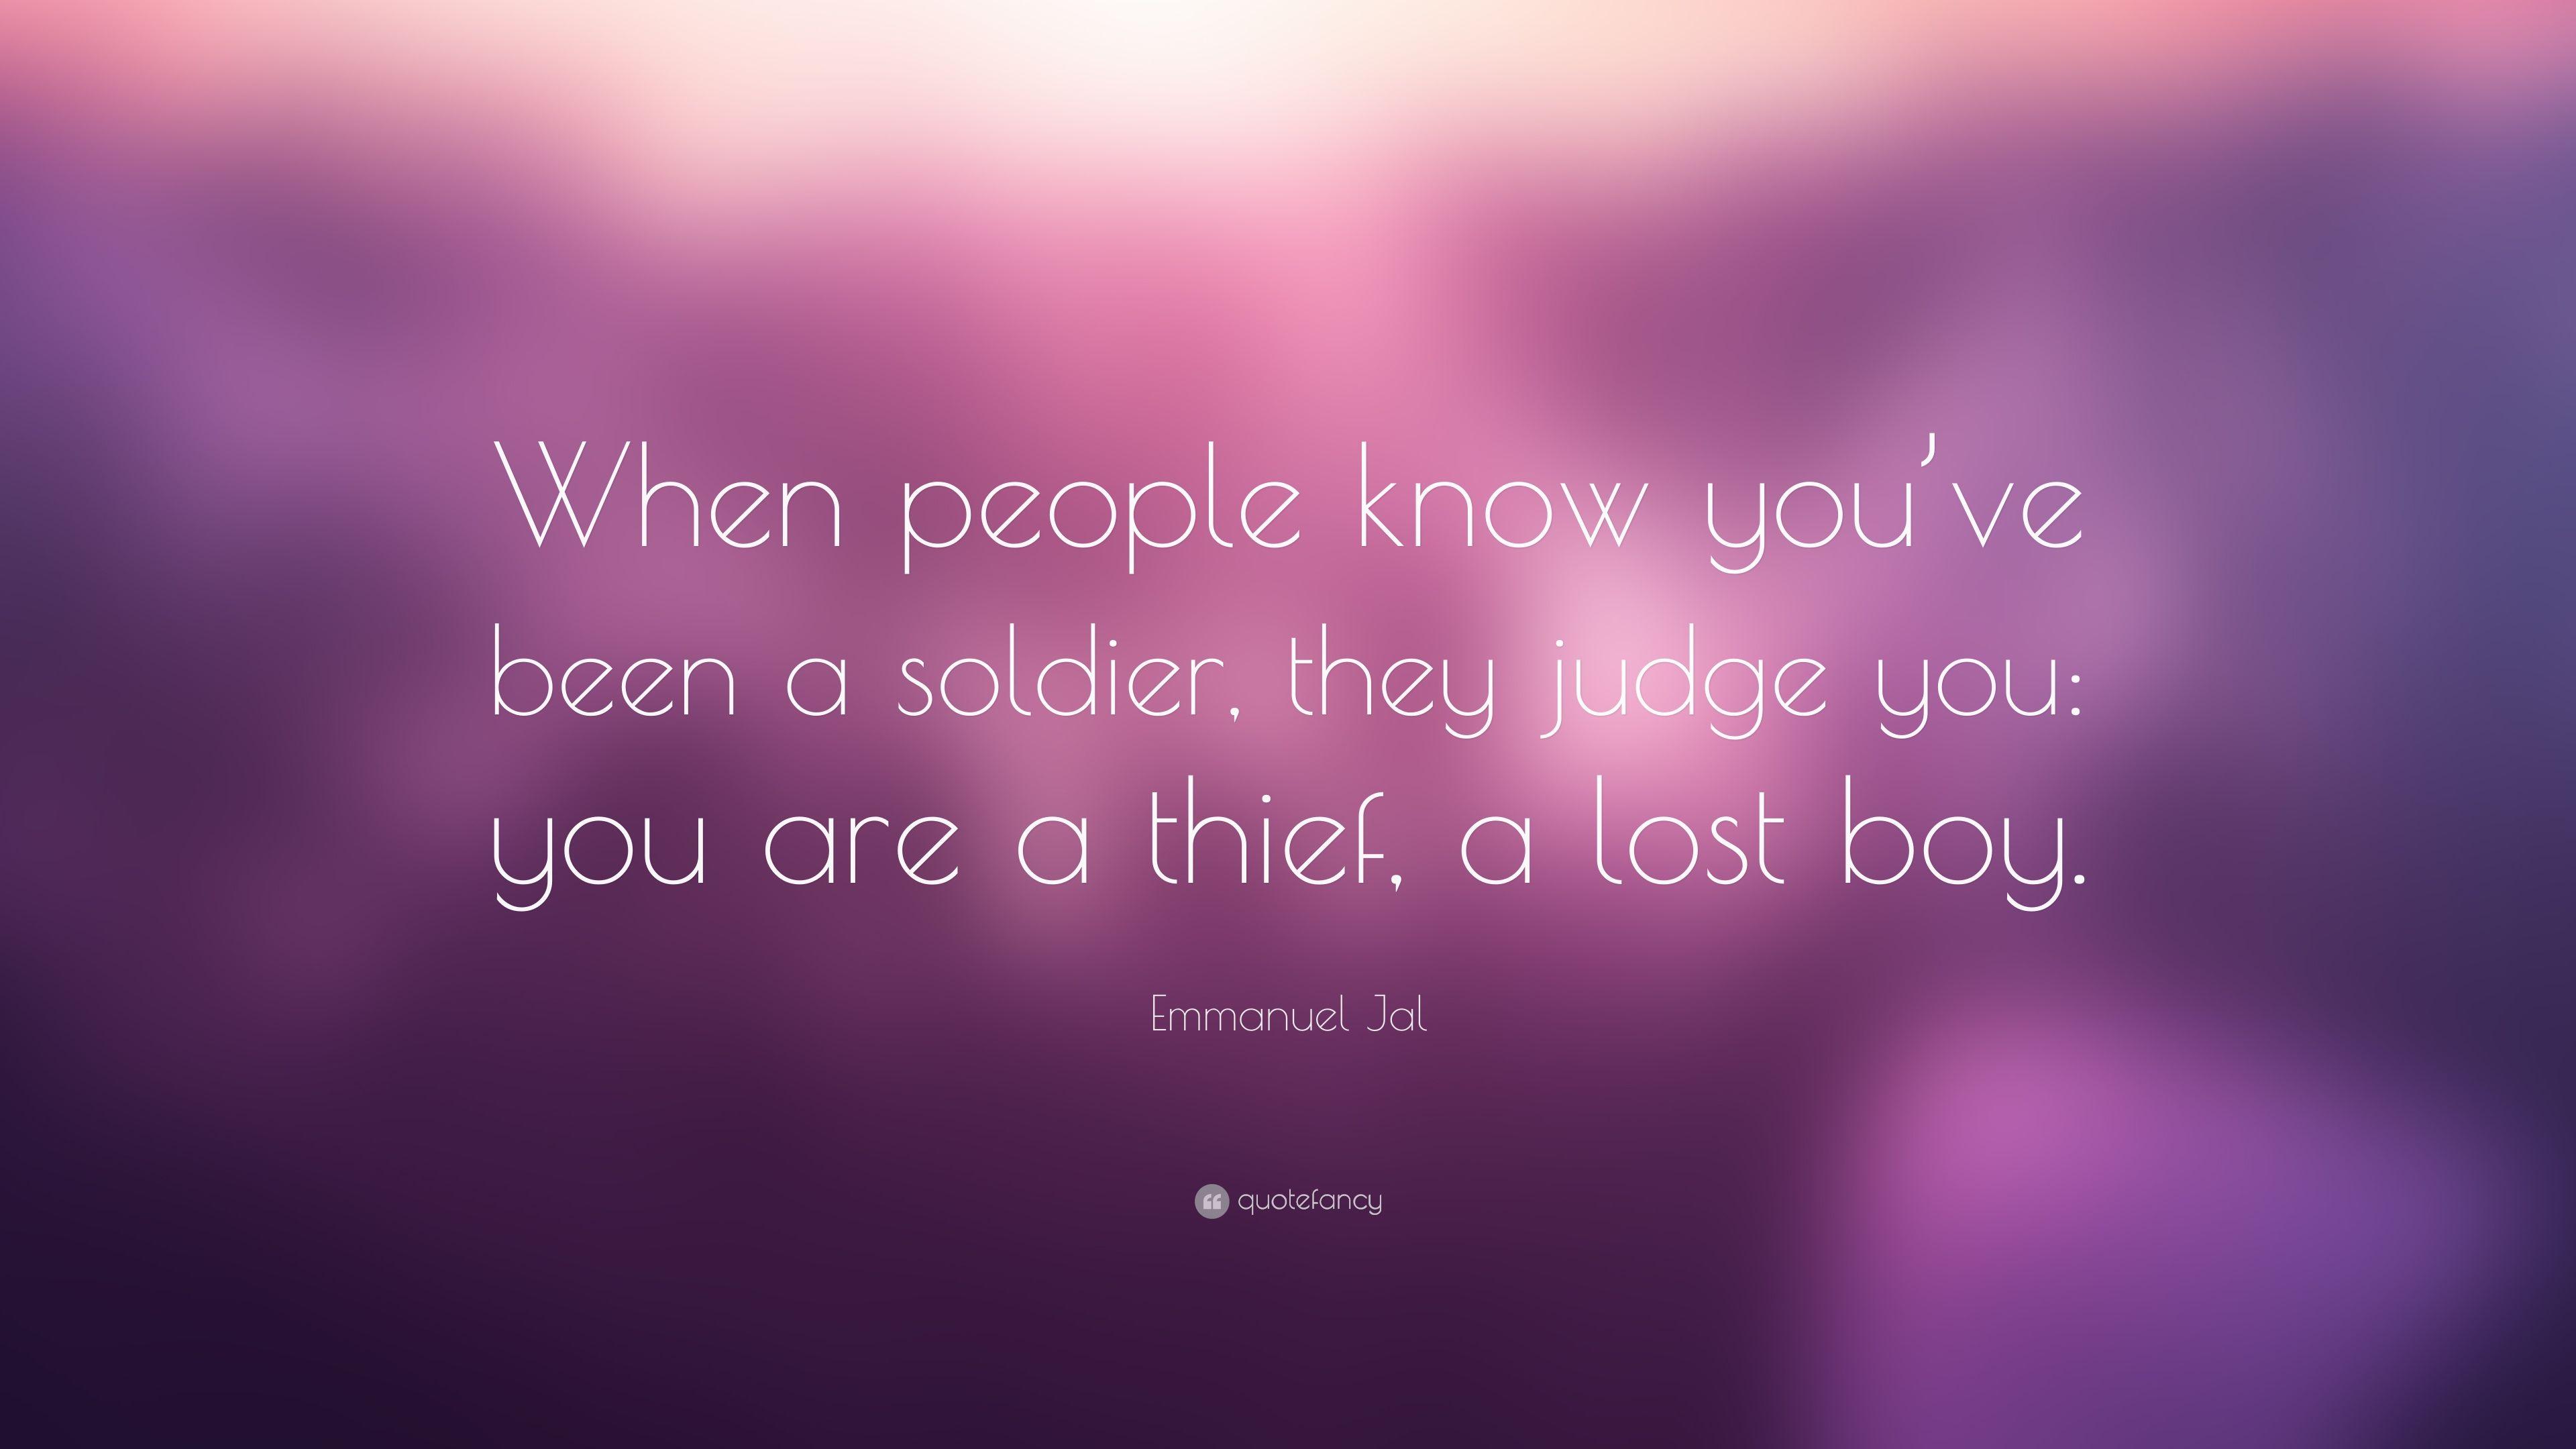 Emmanuel Jal Quote: “When people know you've been a soldier, they